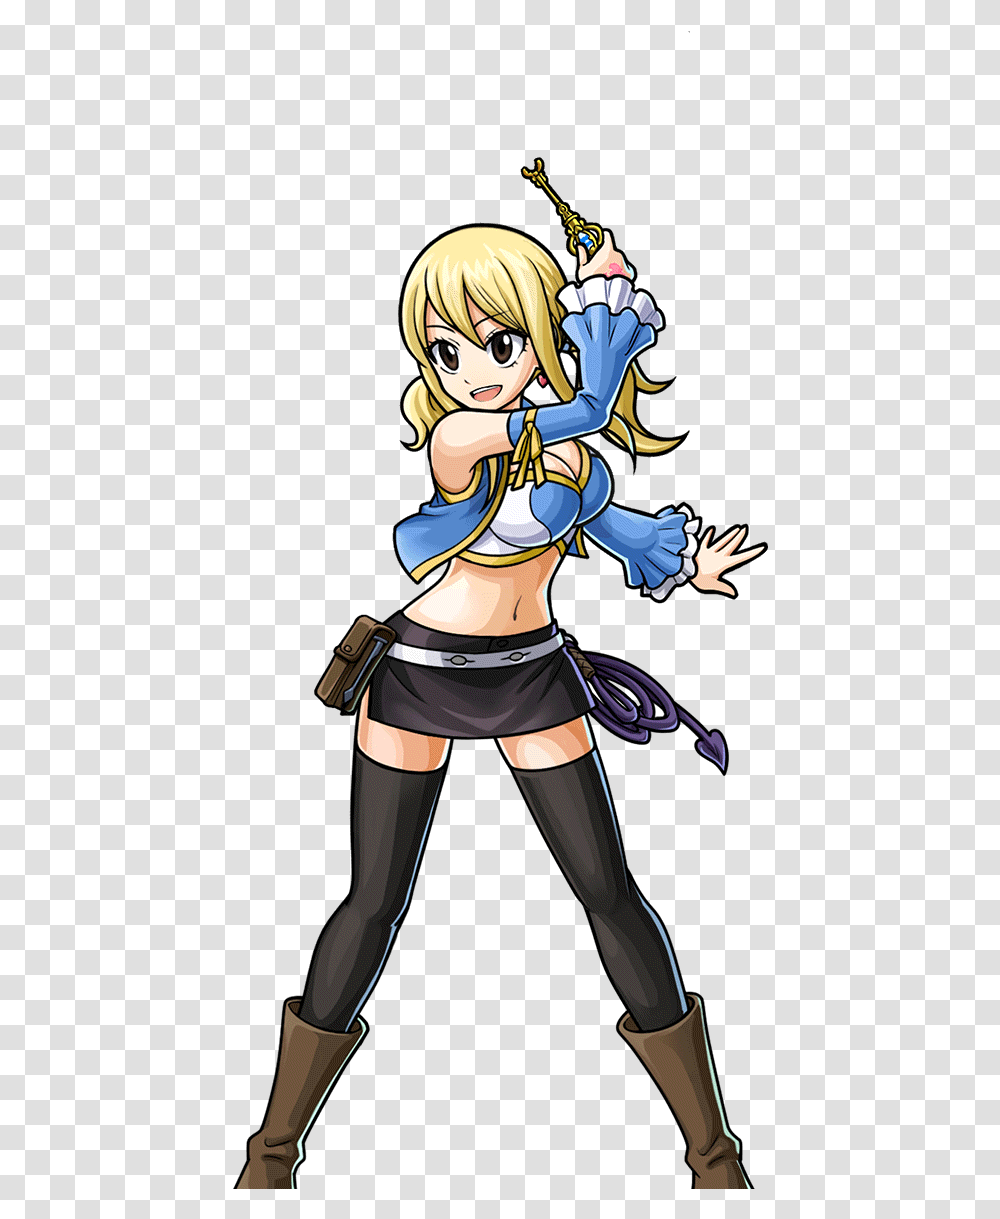 Story Character Lucy Heartfilia 004 Render Fairy Tail Lucy Render, Costume, Manga, Comics, Book Transparent Png